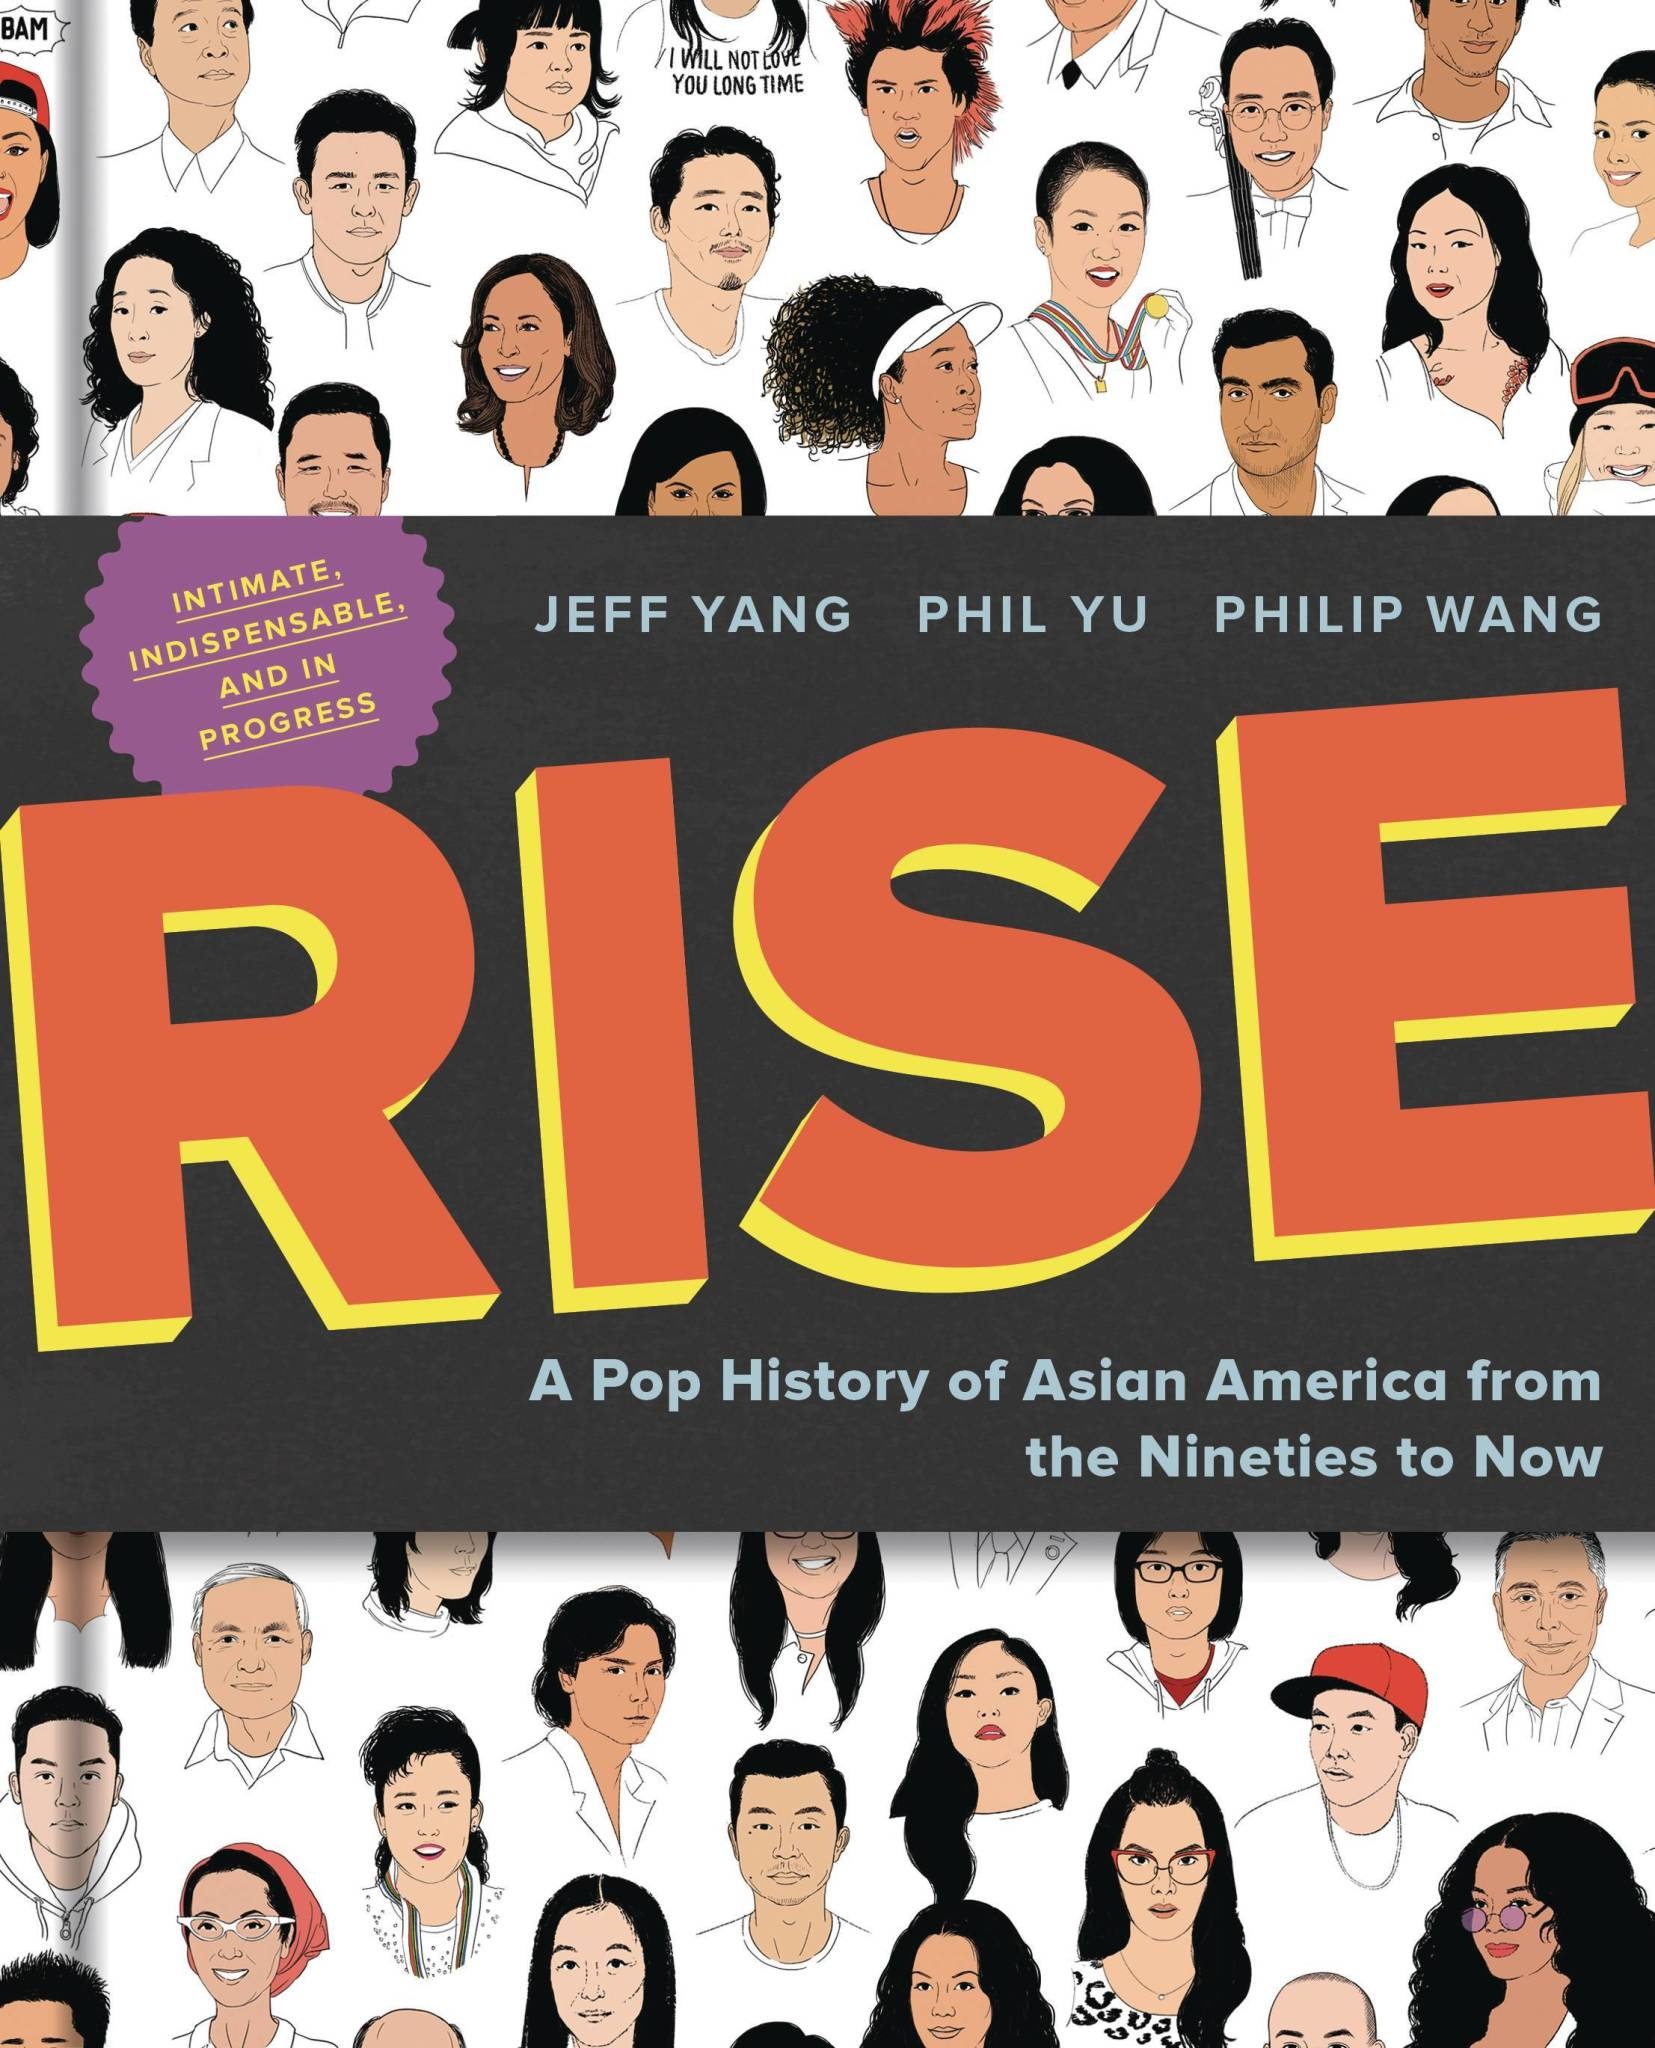 Mariner Rise: A Pop History of Asian America from the Nineties to Now